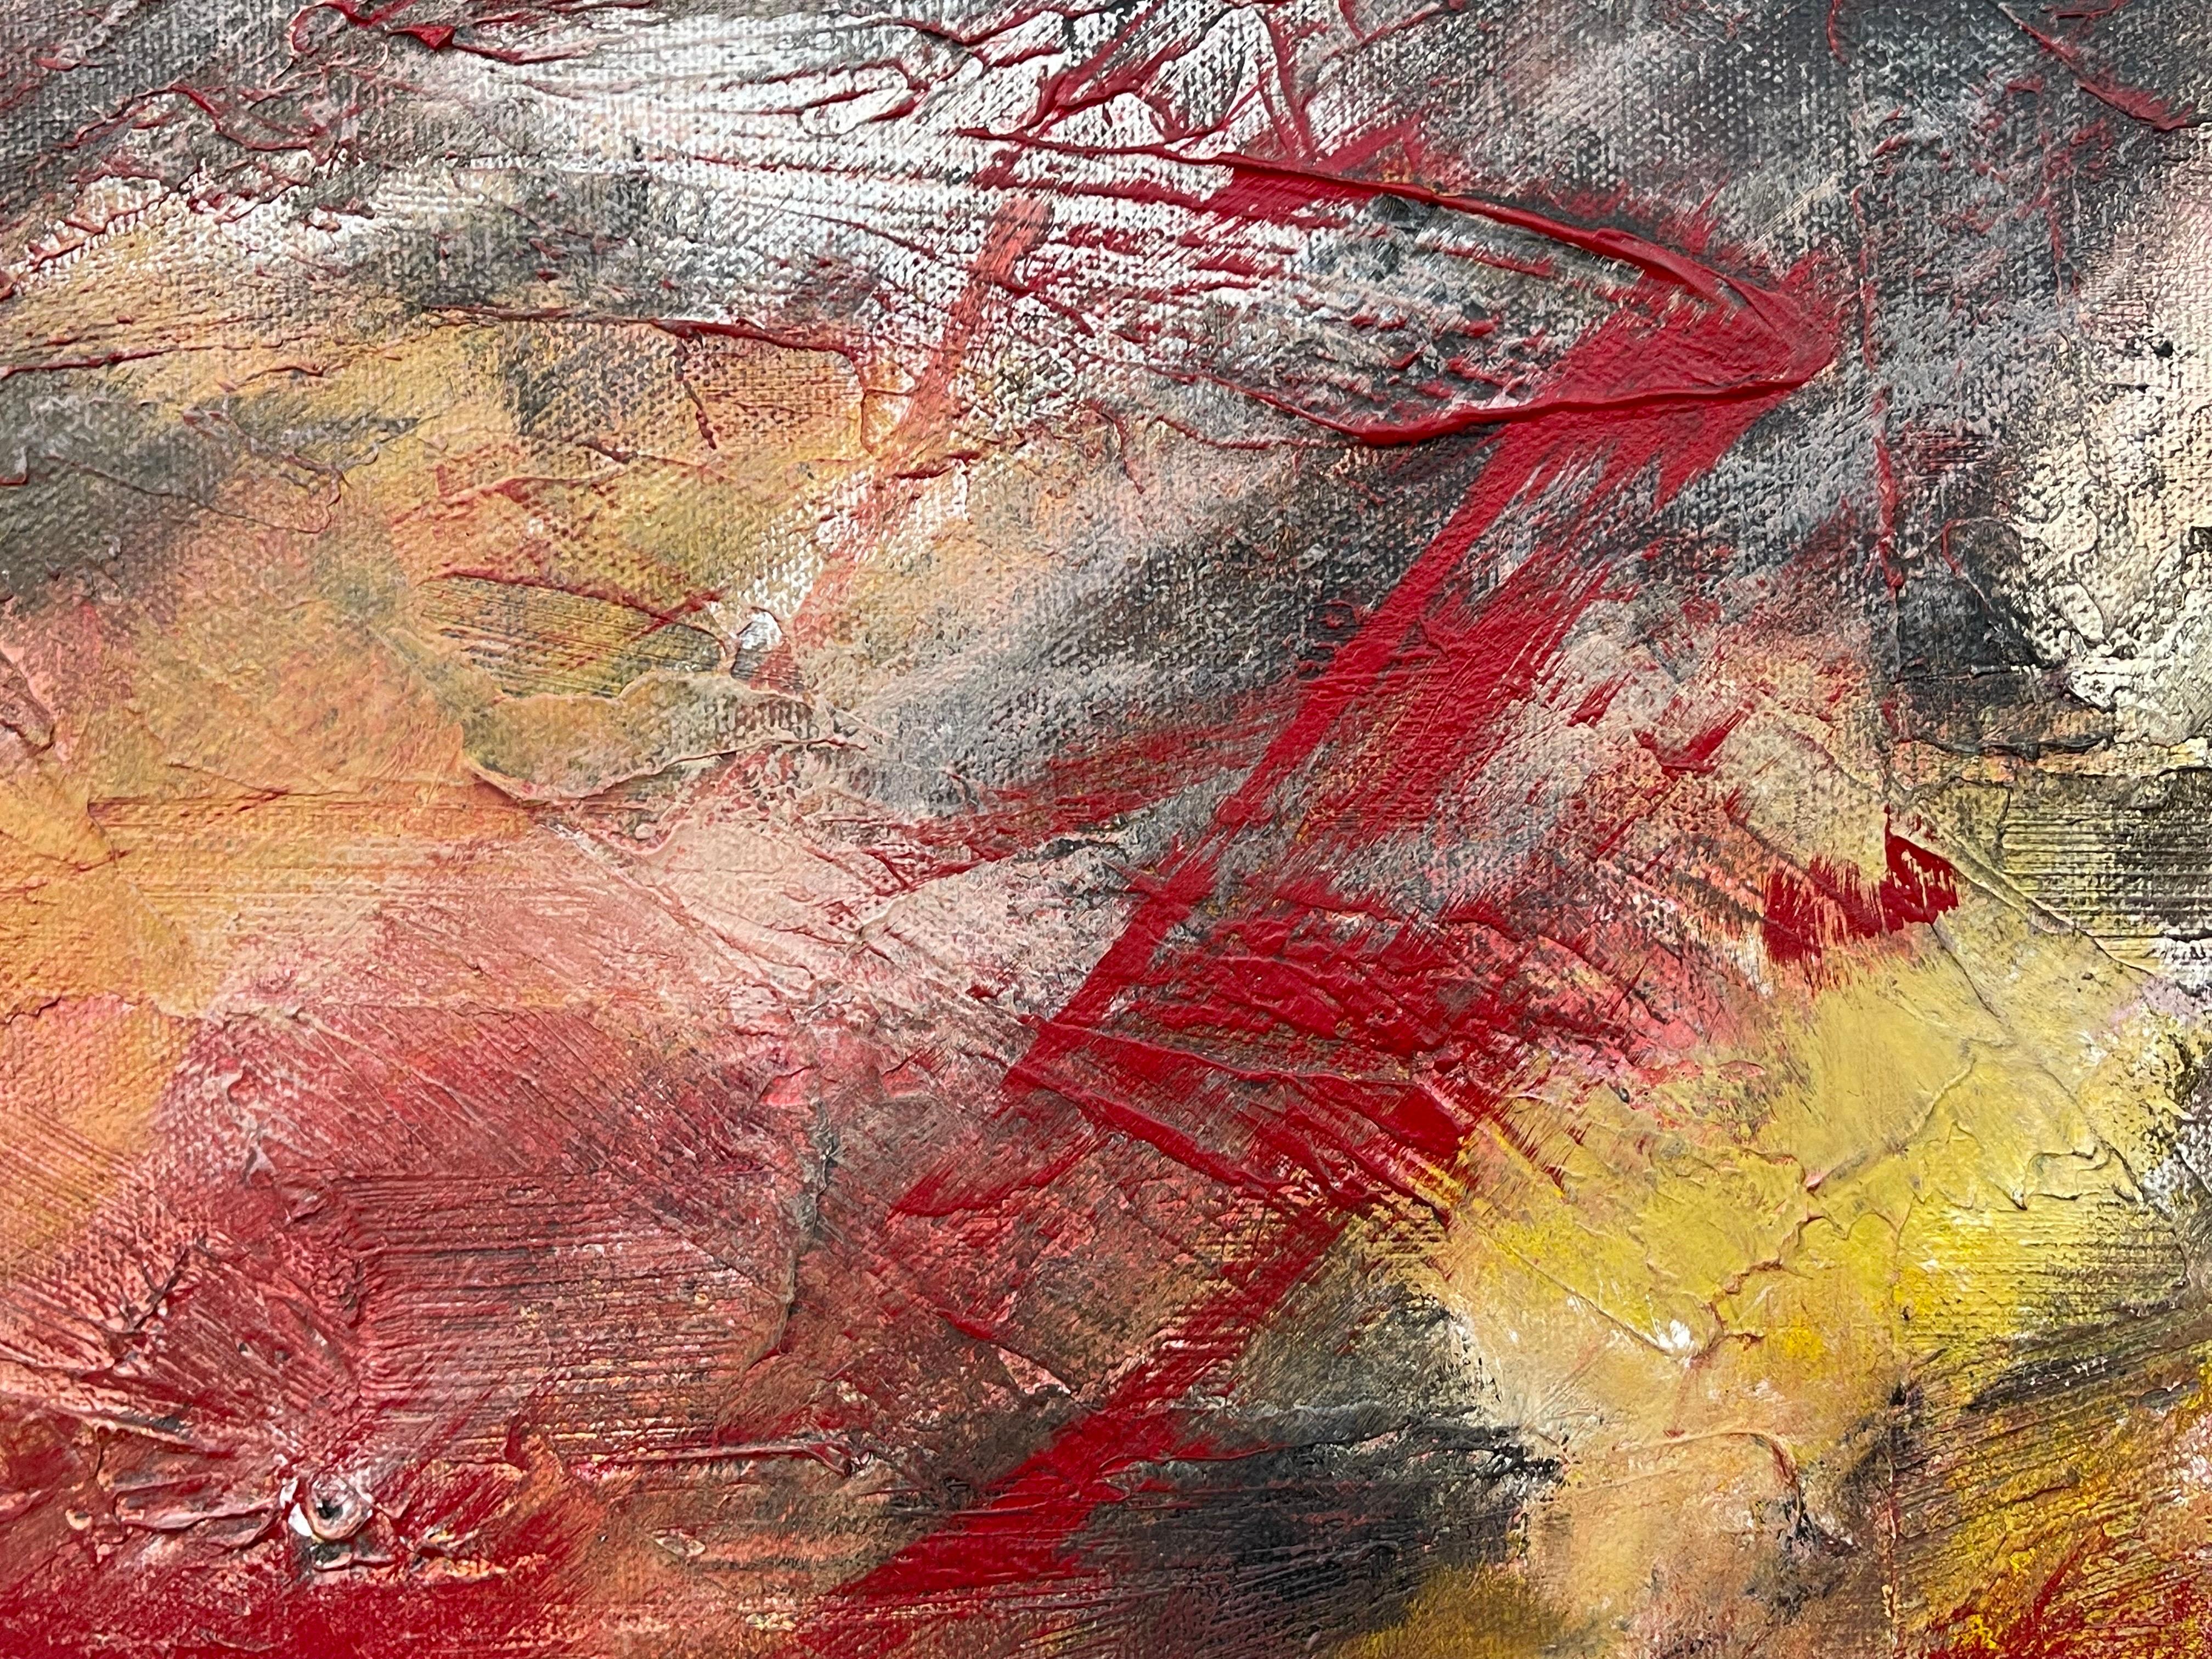 Abstract Landscape using Red, Black and Yellow by Contemporary British Artist For Sale 6